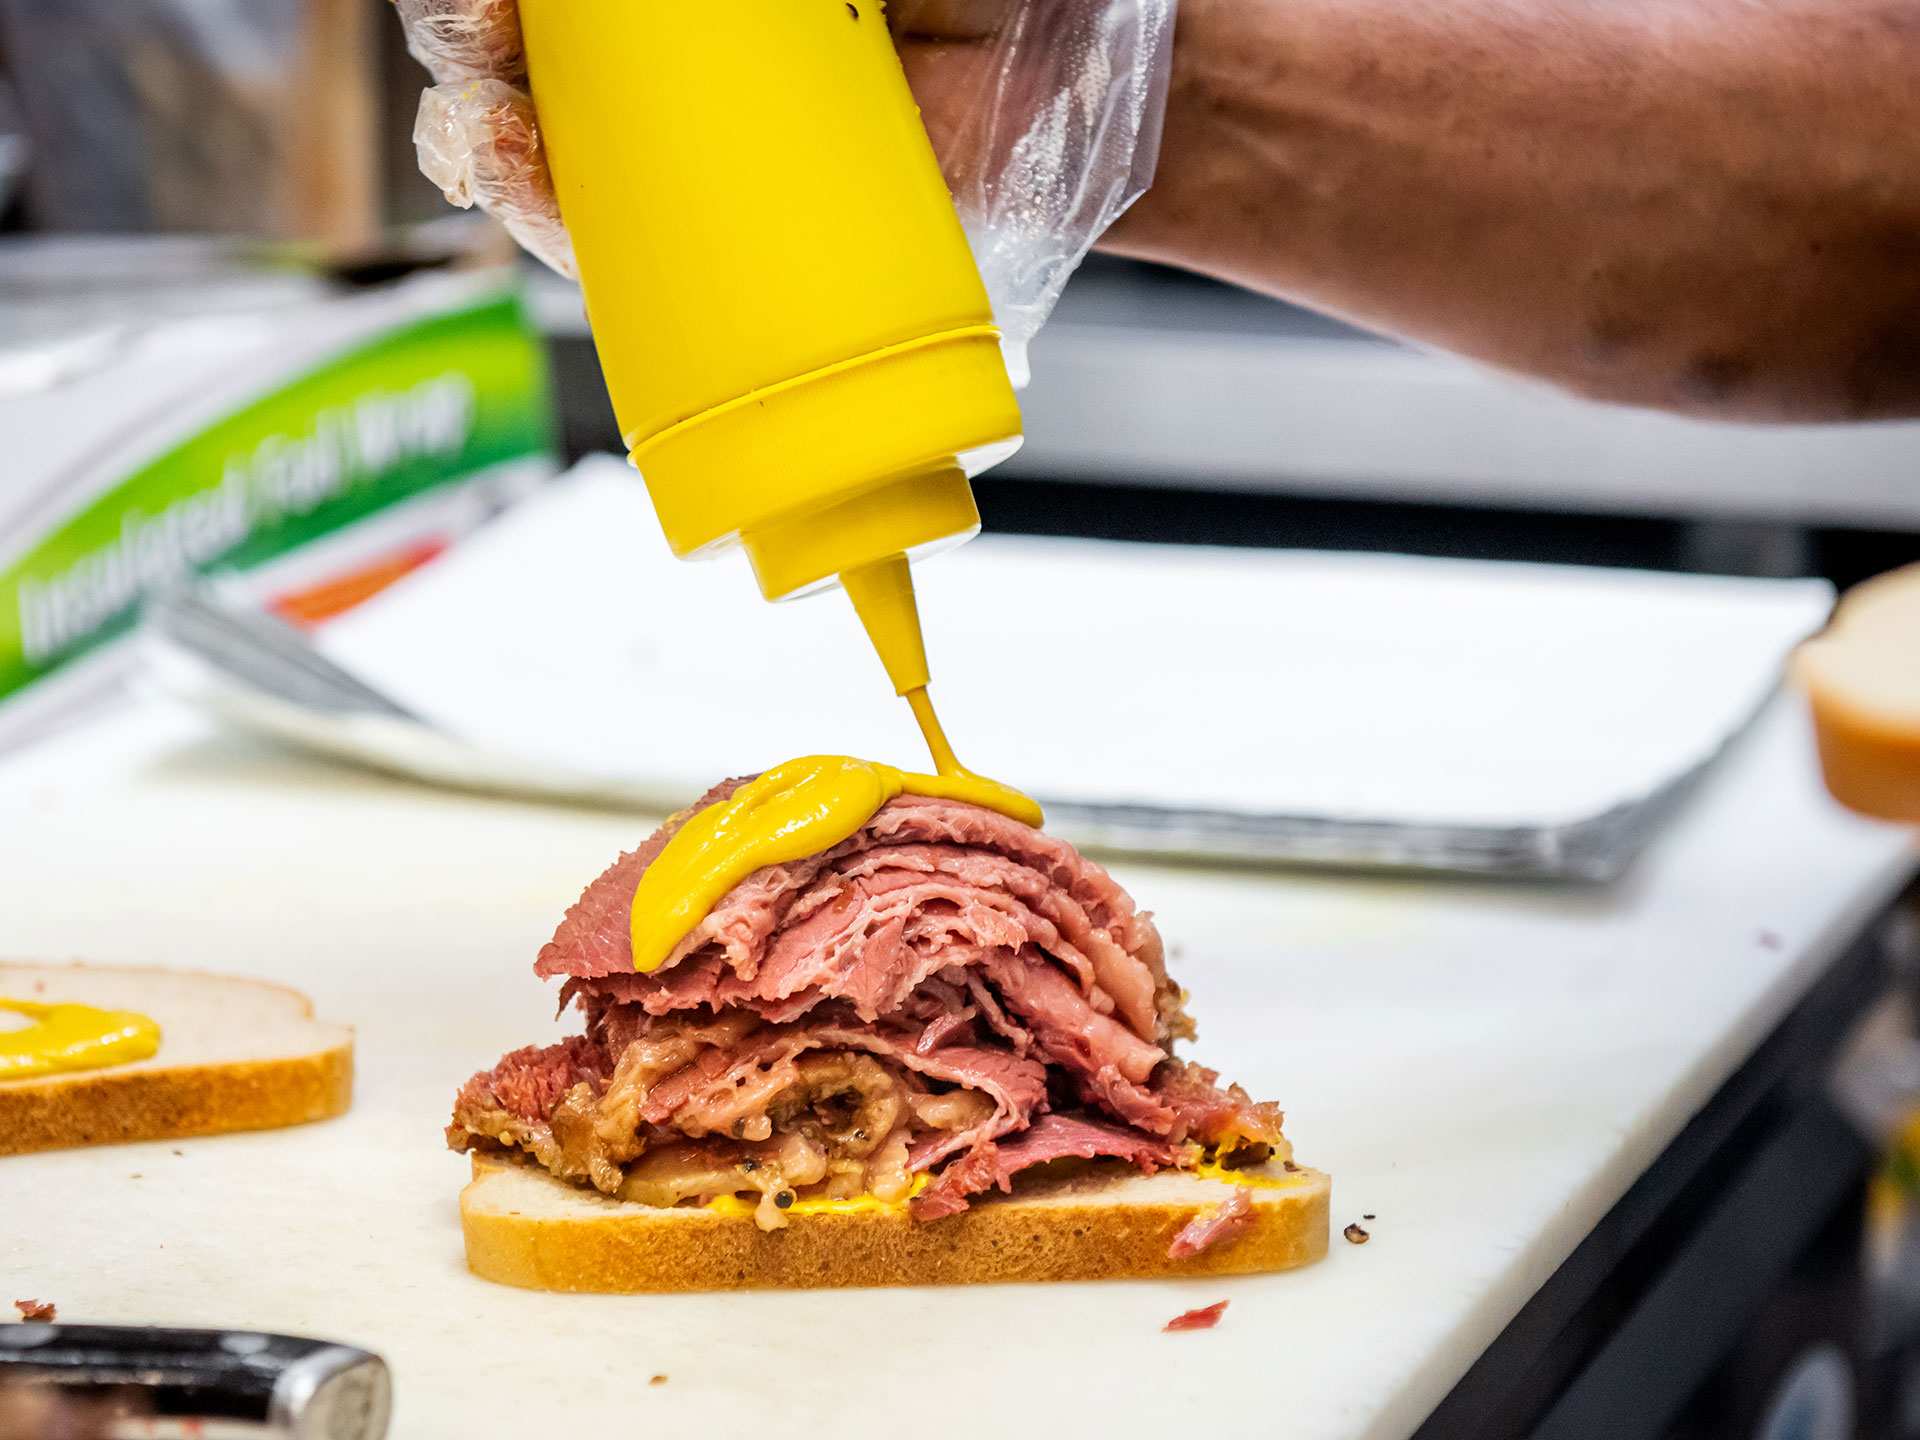 Michelin recommended and Michelin star restaurants in Toronto | Sandwich at SumiLicious Smoked Meat & Deli